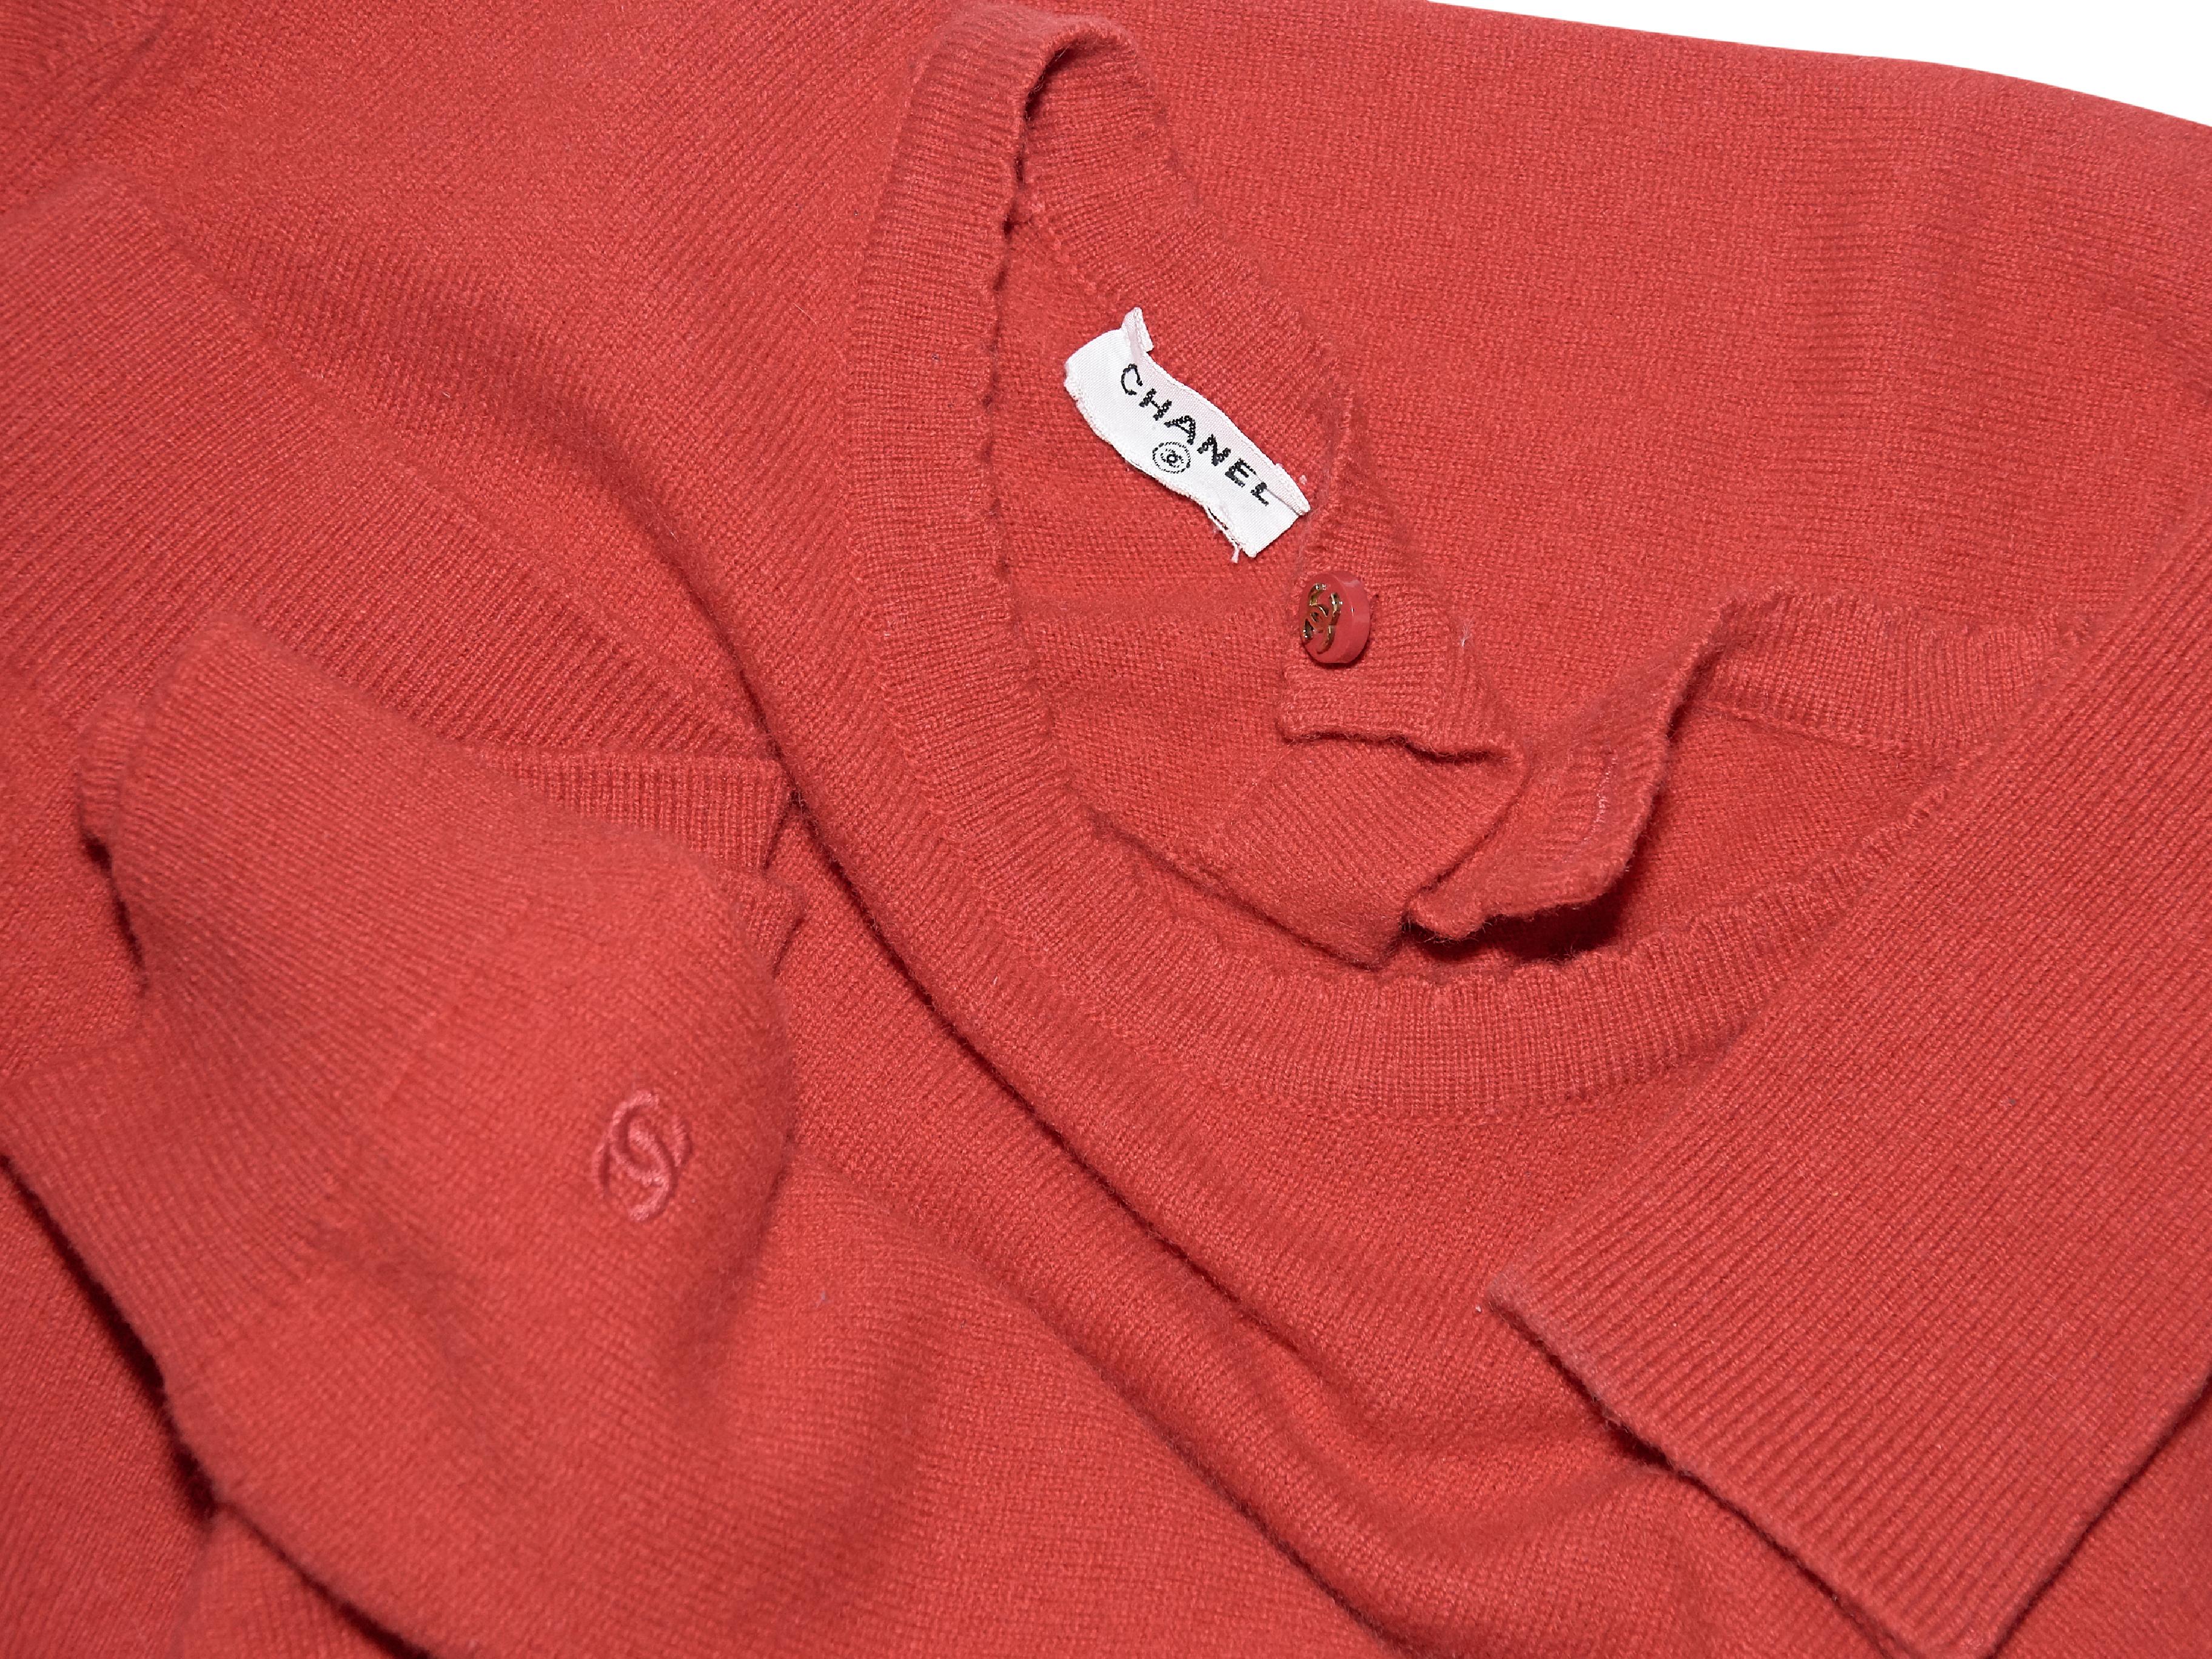 Red Vintage Chanel Cashmere Sweater im Zustand „Gut“ in New York, NY